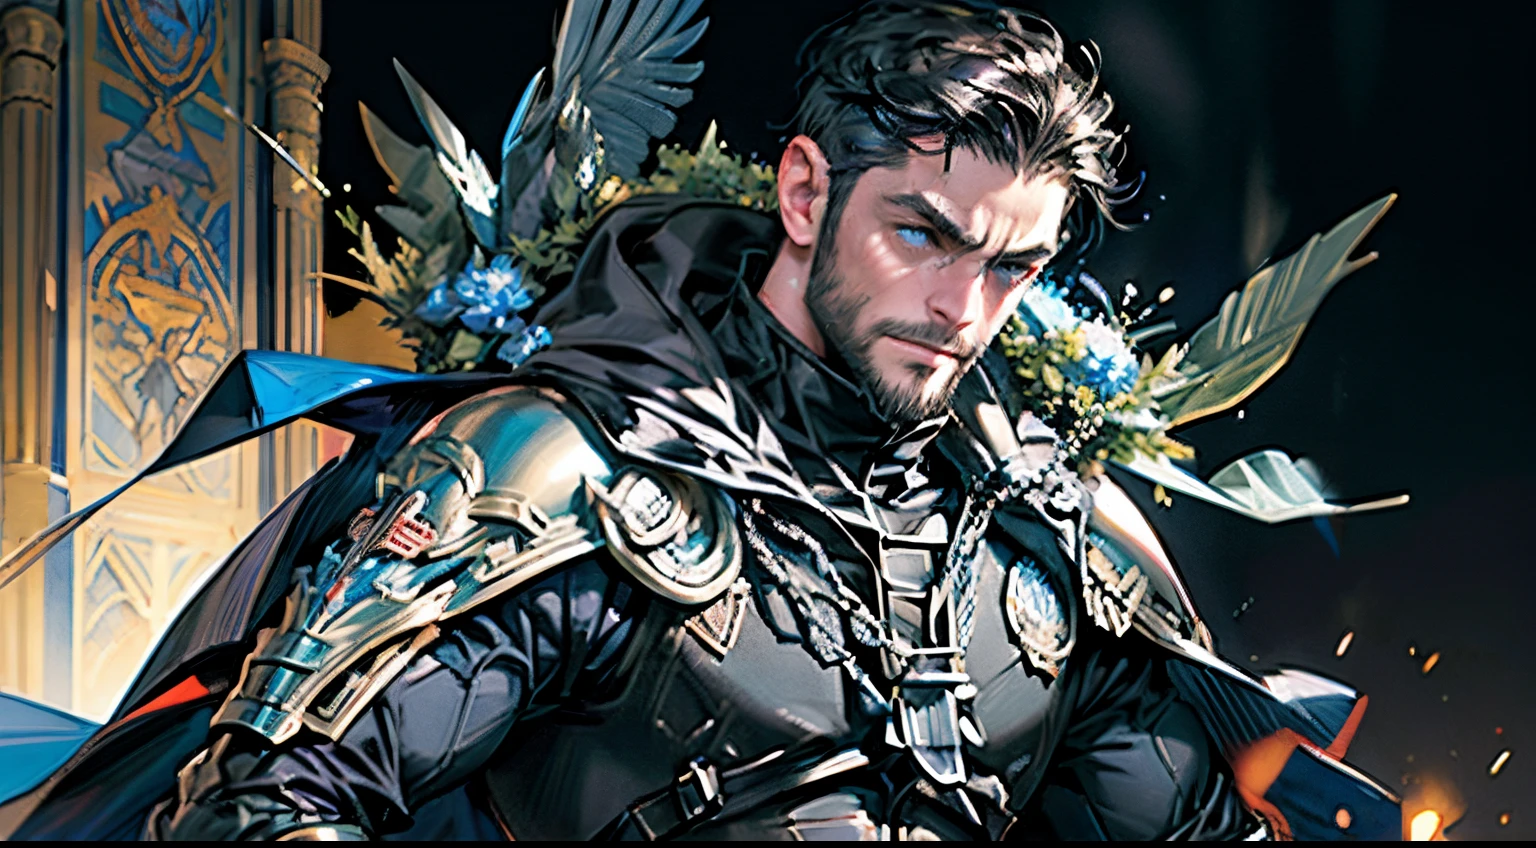 Highest quality, masterpiece, male, black super short hair, blue eyes, armor, cape, brightly colored, bright picture, paladin, muscular, short beard, mature, glowing particle special effects, church, national character face, tall, strong, rough face, falling feathers